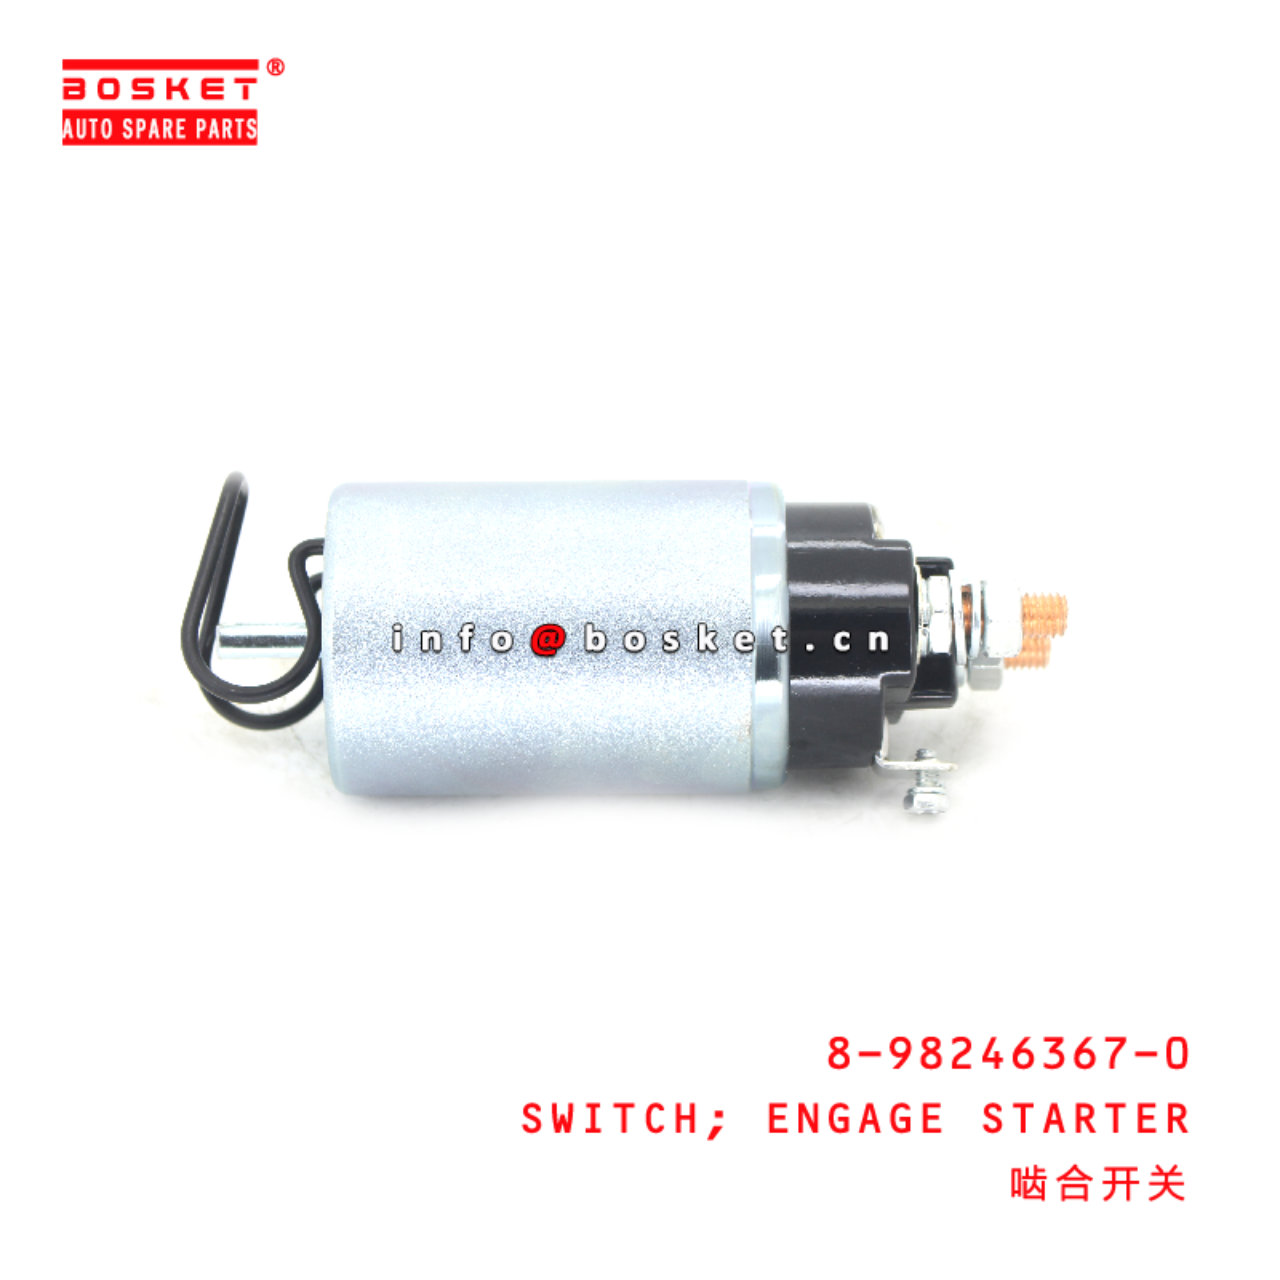 8-98246367-0 Engage Starter Switch suitable for ISUZU 700P 4HK1 